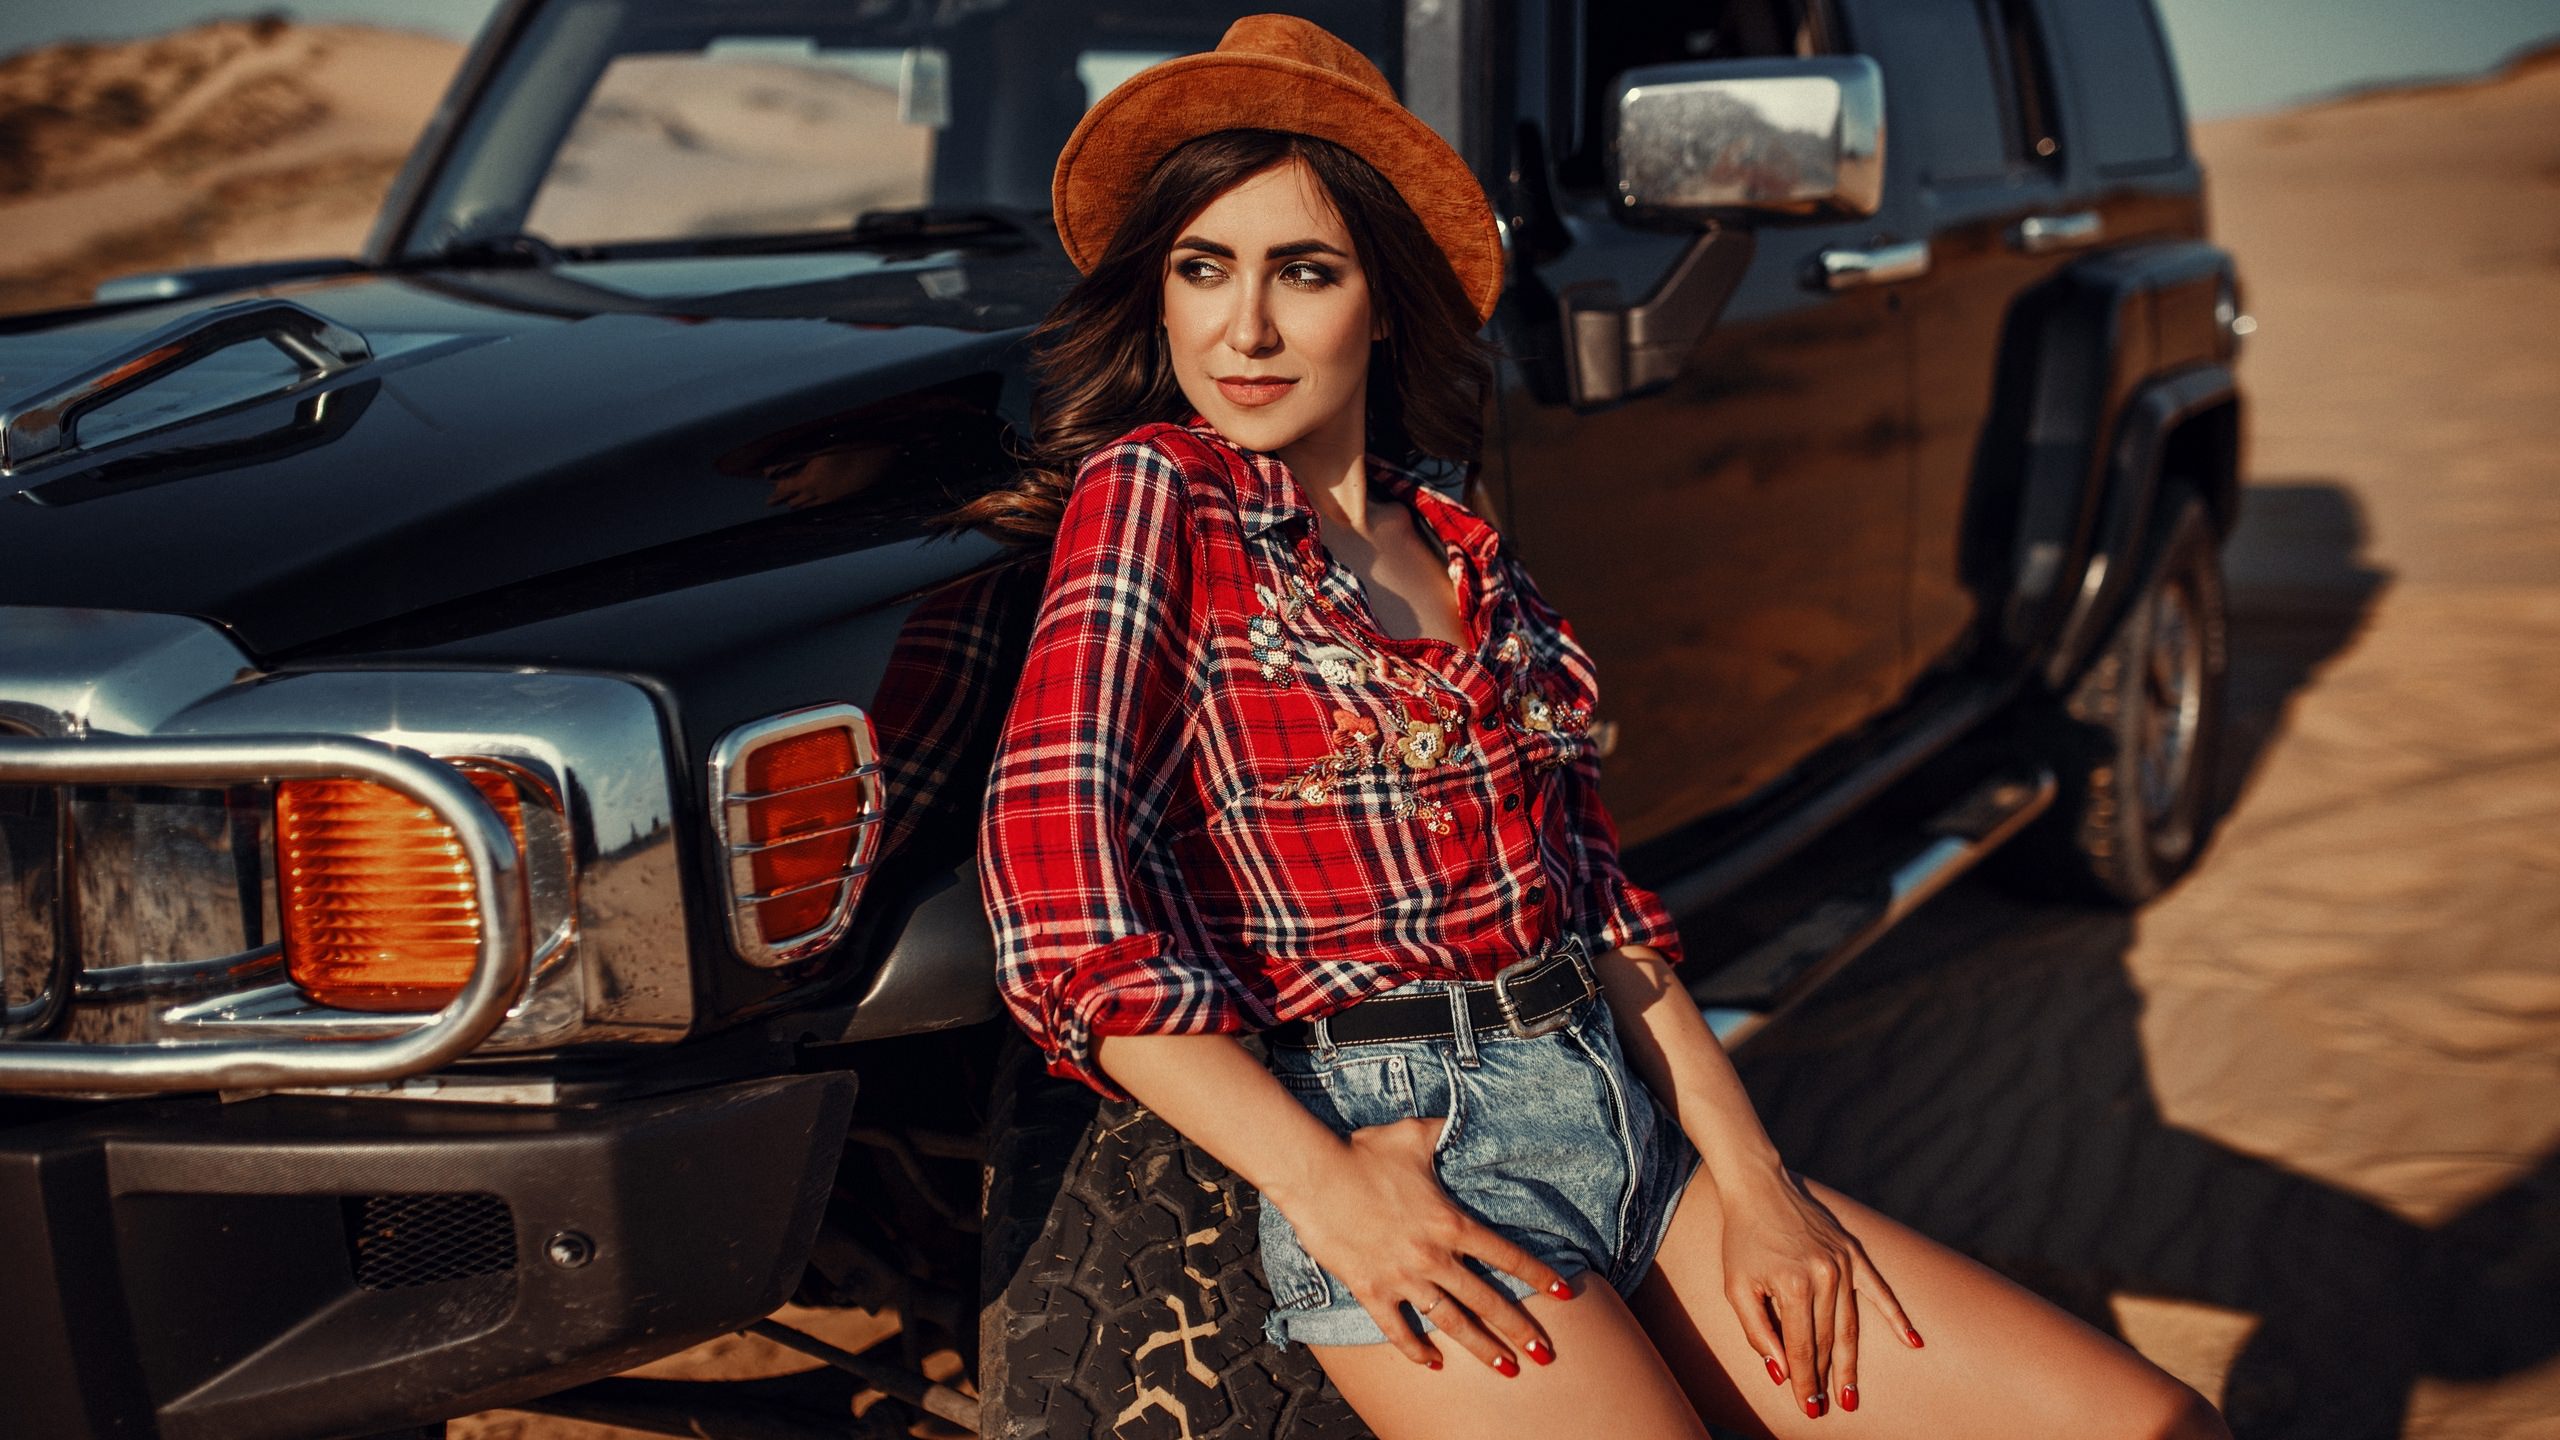 People 2560x1440 women hat women outdoors sky clouds car desert plaid shirt jean shorts women with cars red nails belt smiling Hummer American cars